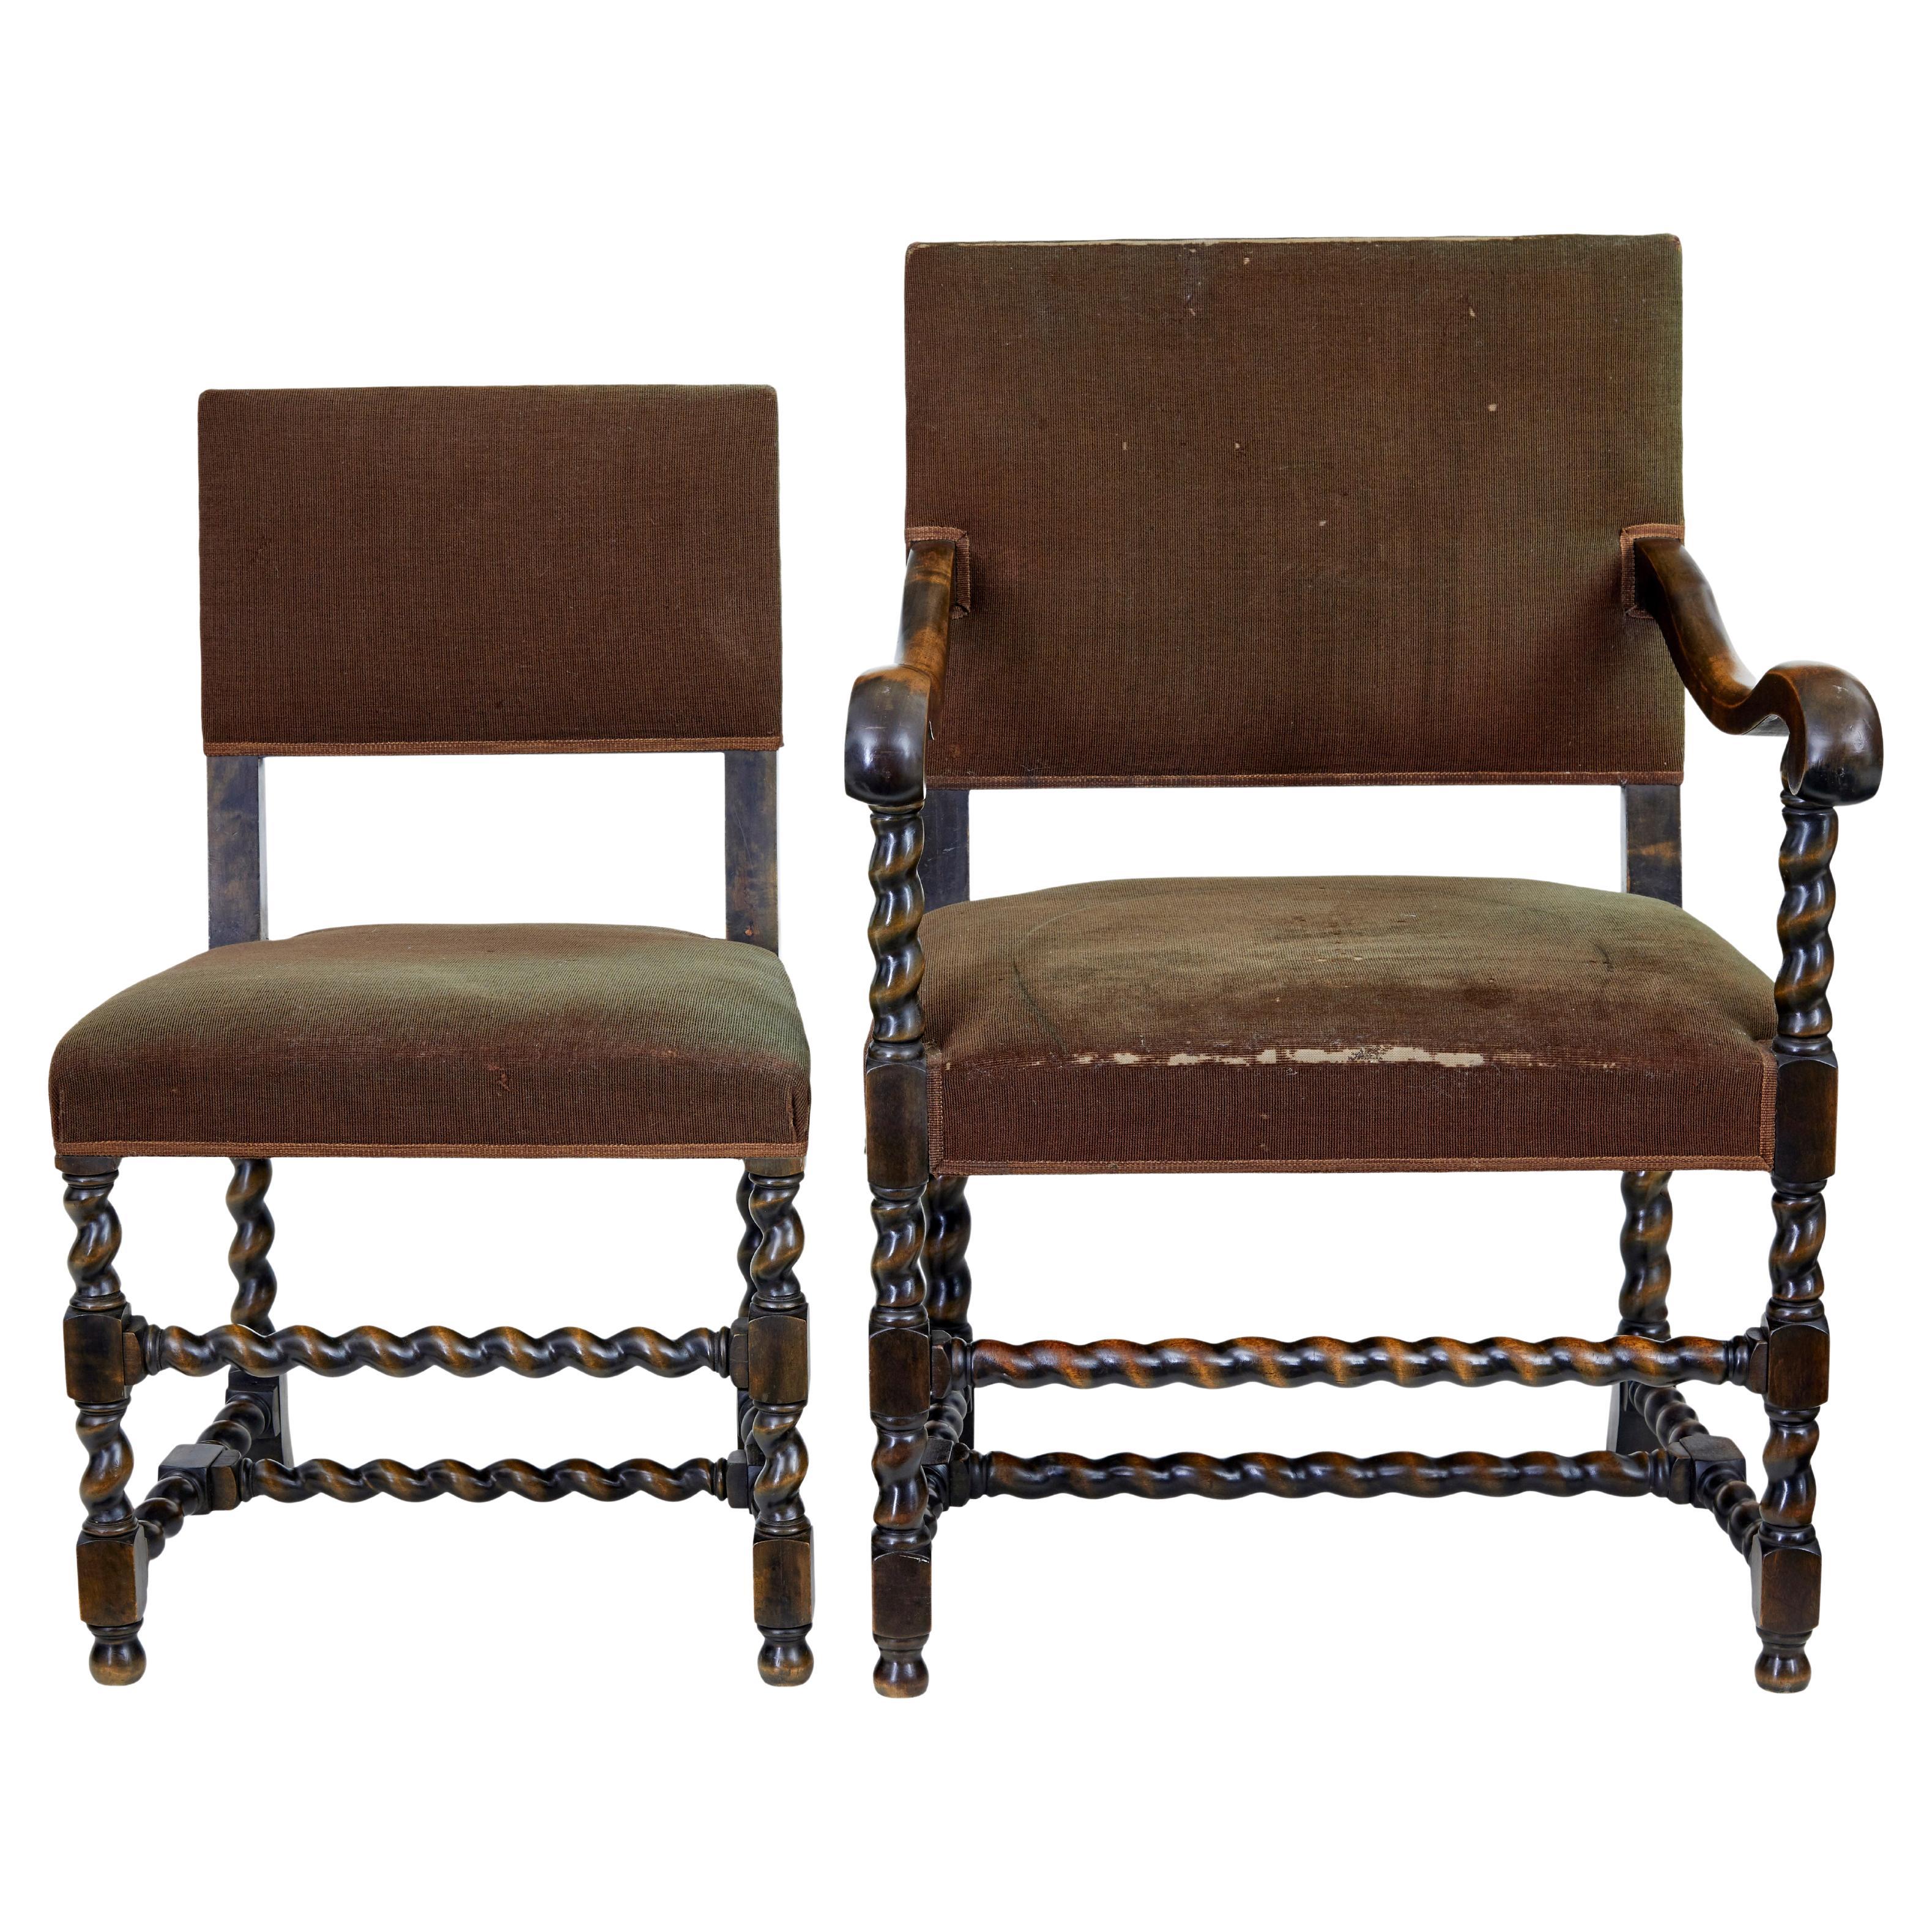 2 mid 20th century chairs by Otto Schulz for Boet